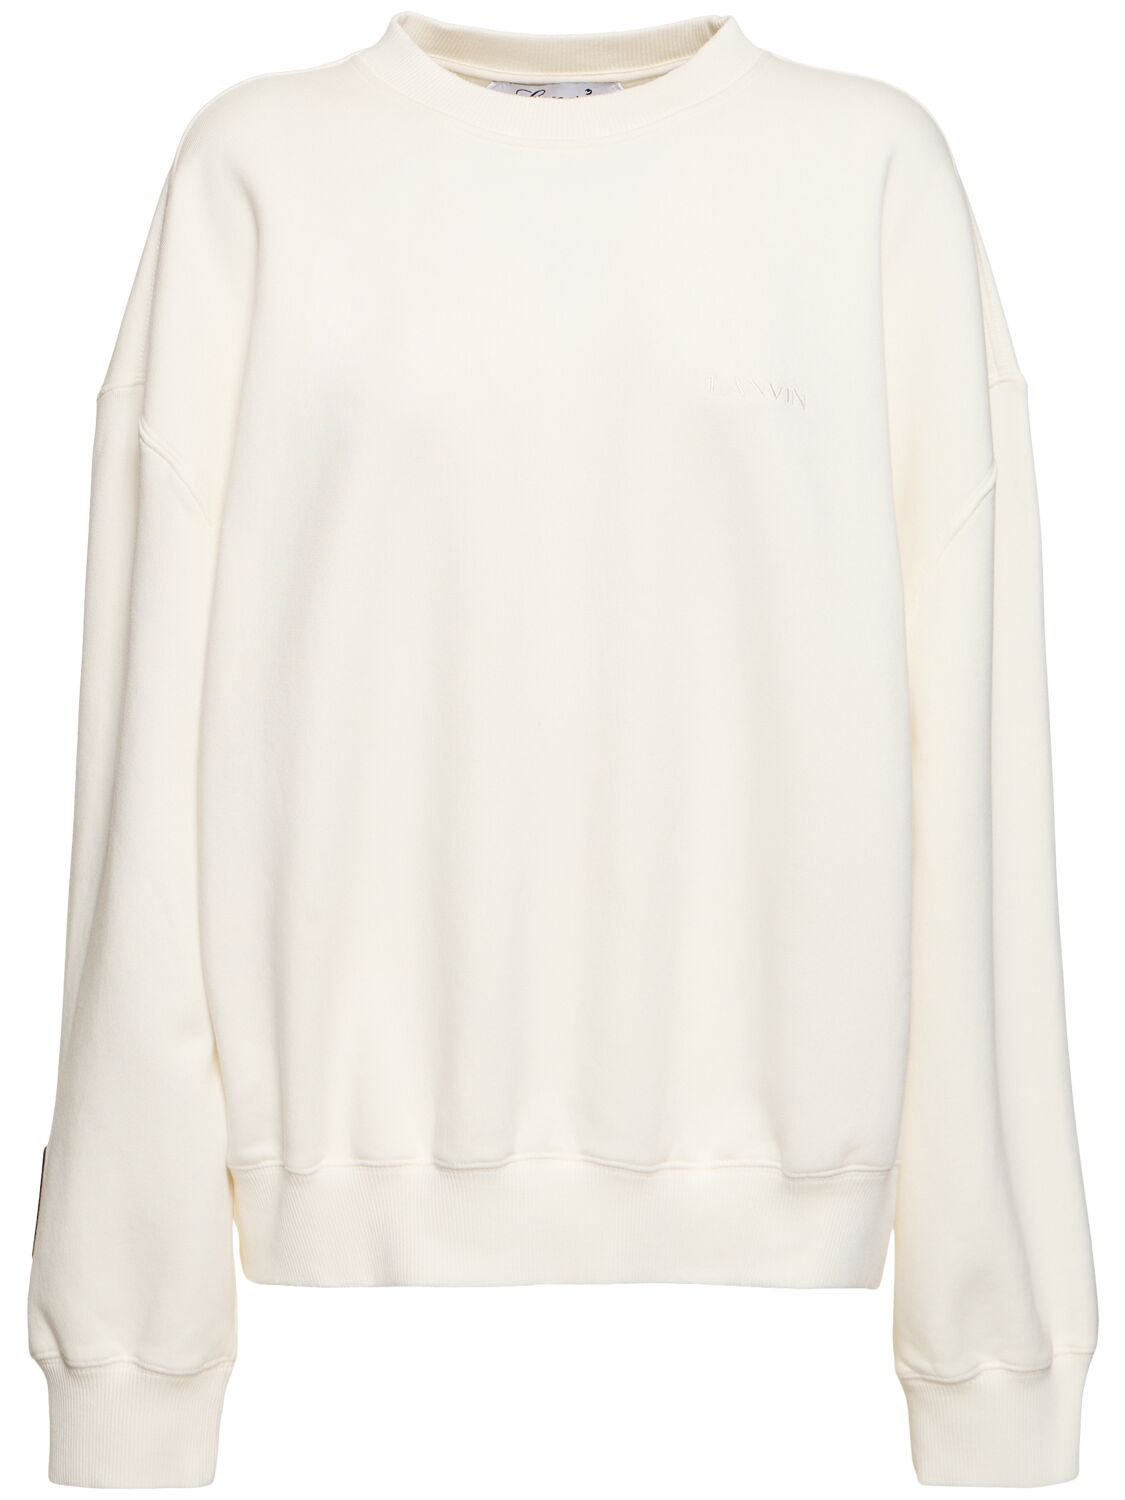 Lanvin Printed Long Sleeve T-shirt In White